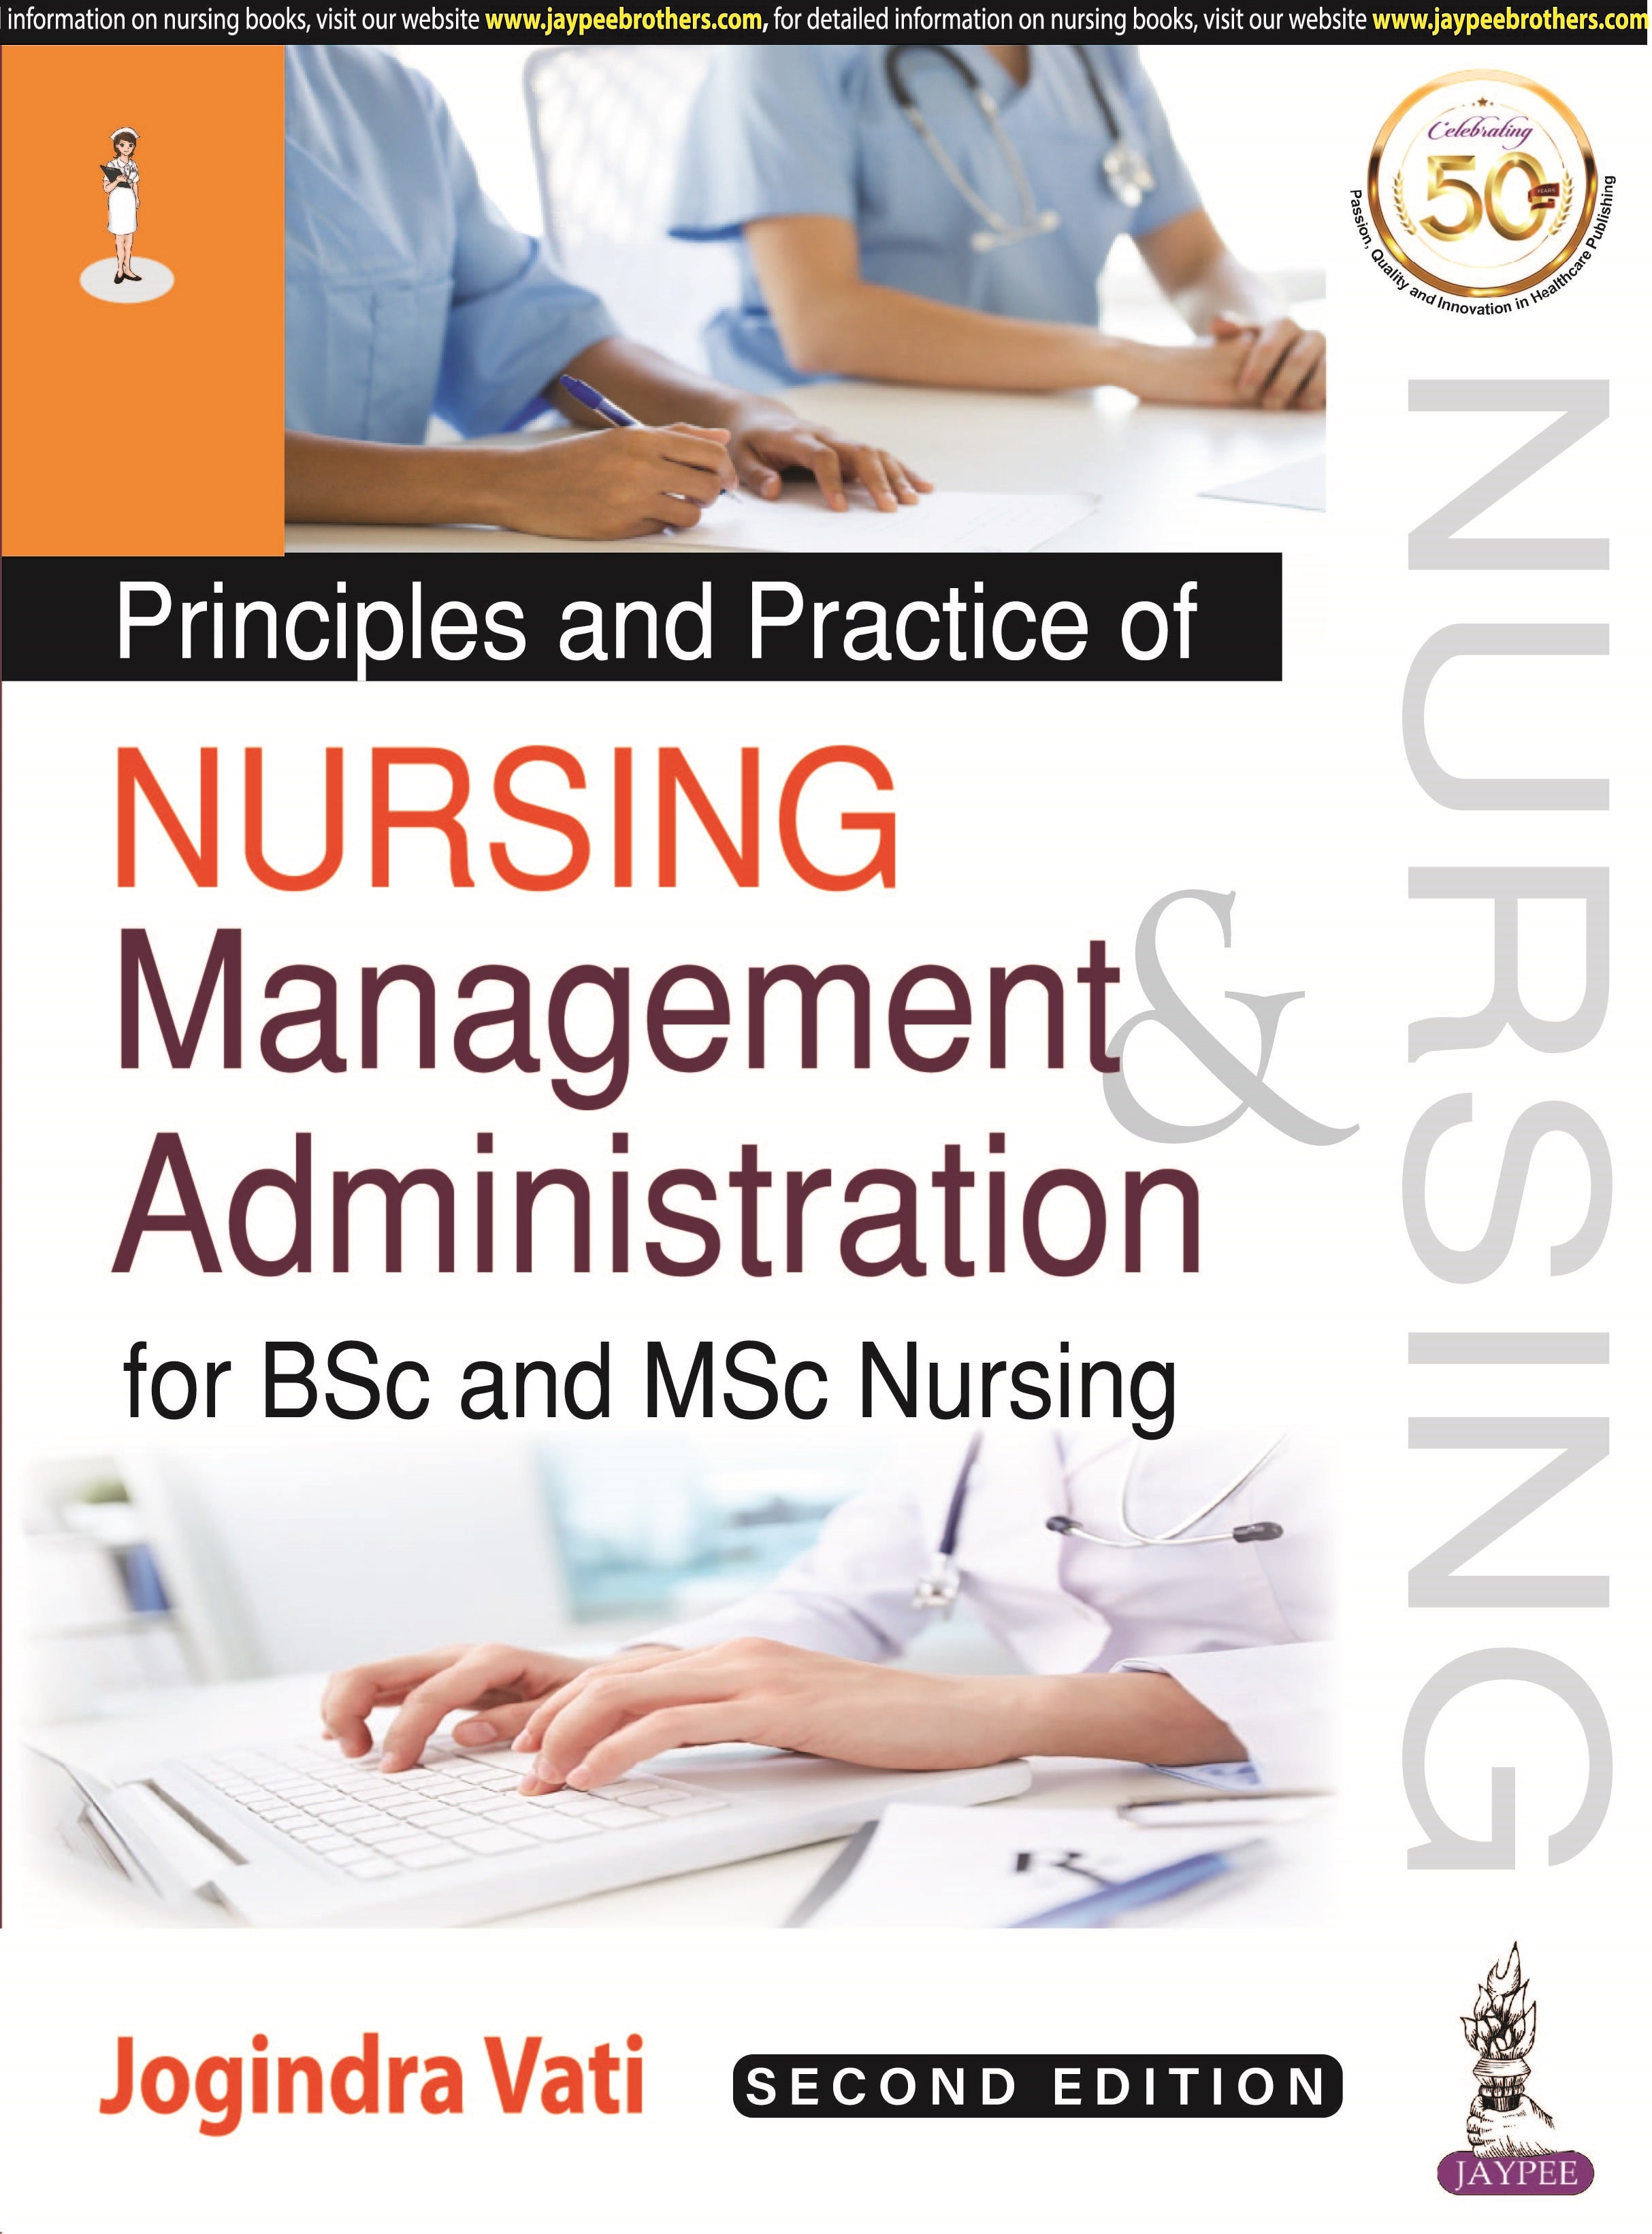 PRINCIPLES AND PRACTICE OF NURSING MANAGEMENT AND ADMINISTRATION FOR BSC AND MSC NURSING,2/E,JOGINDRA VATI